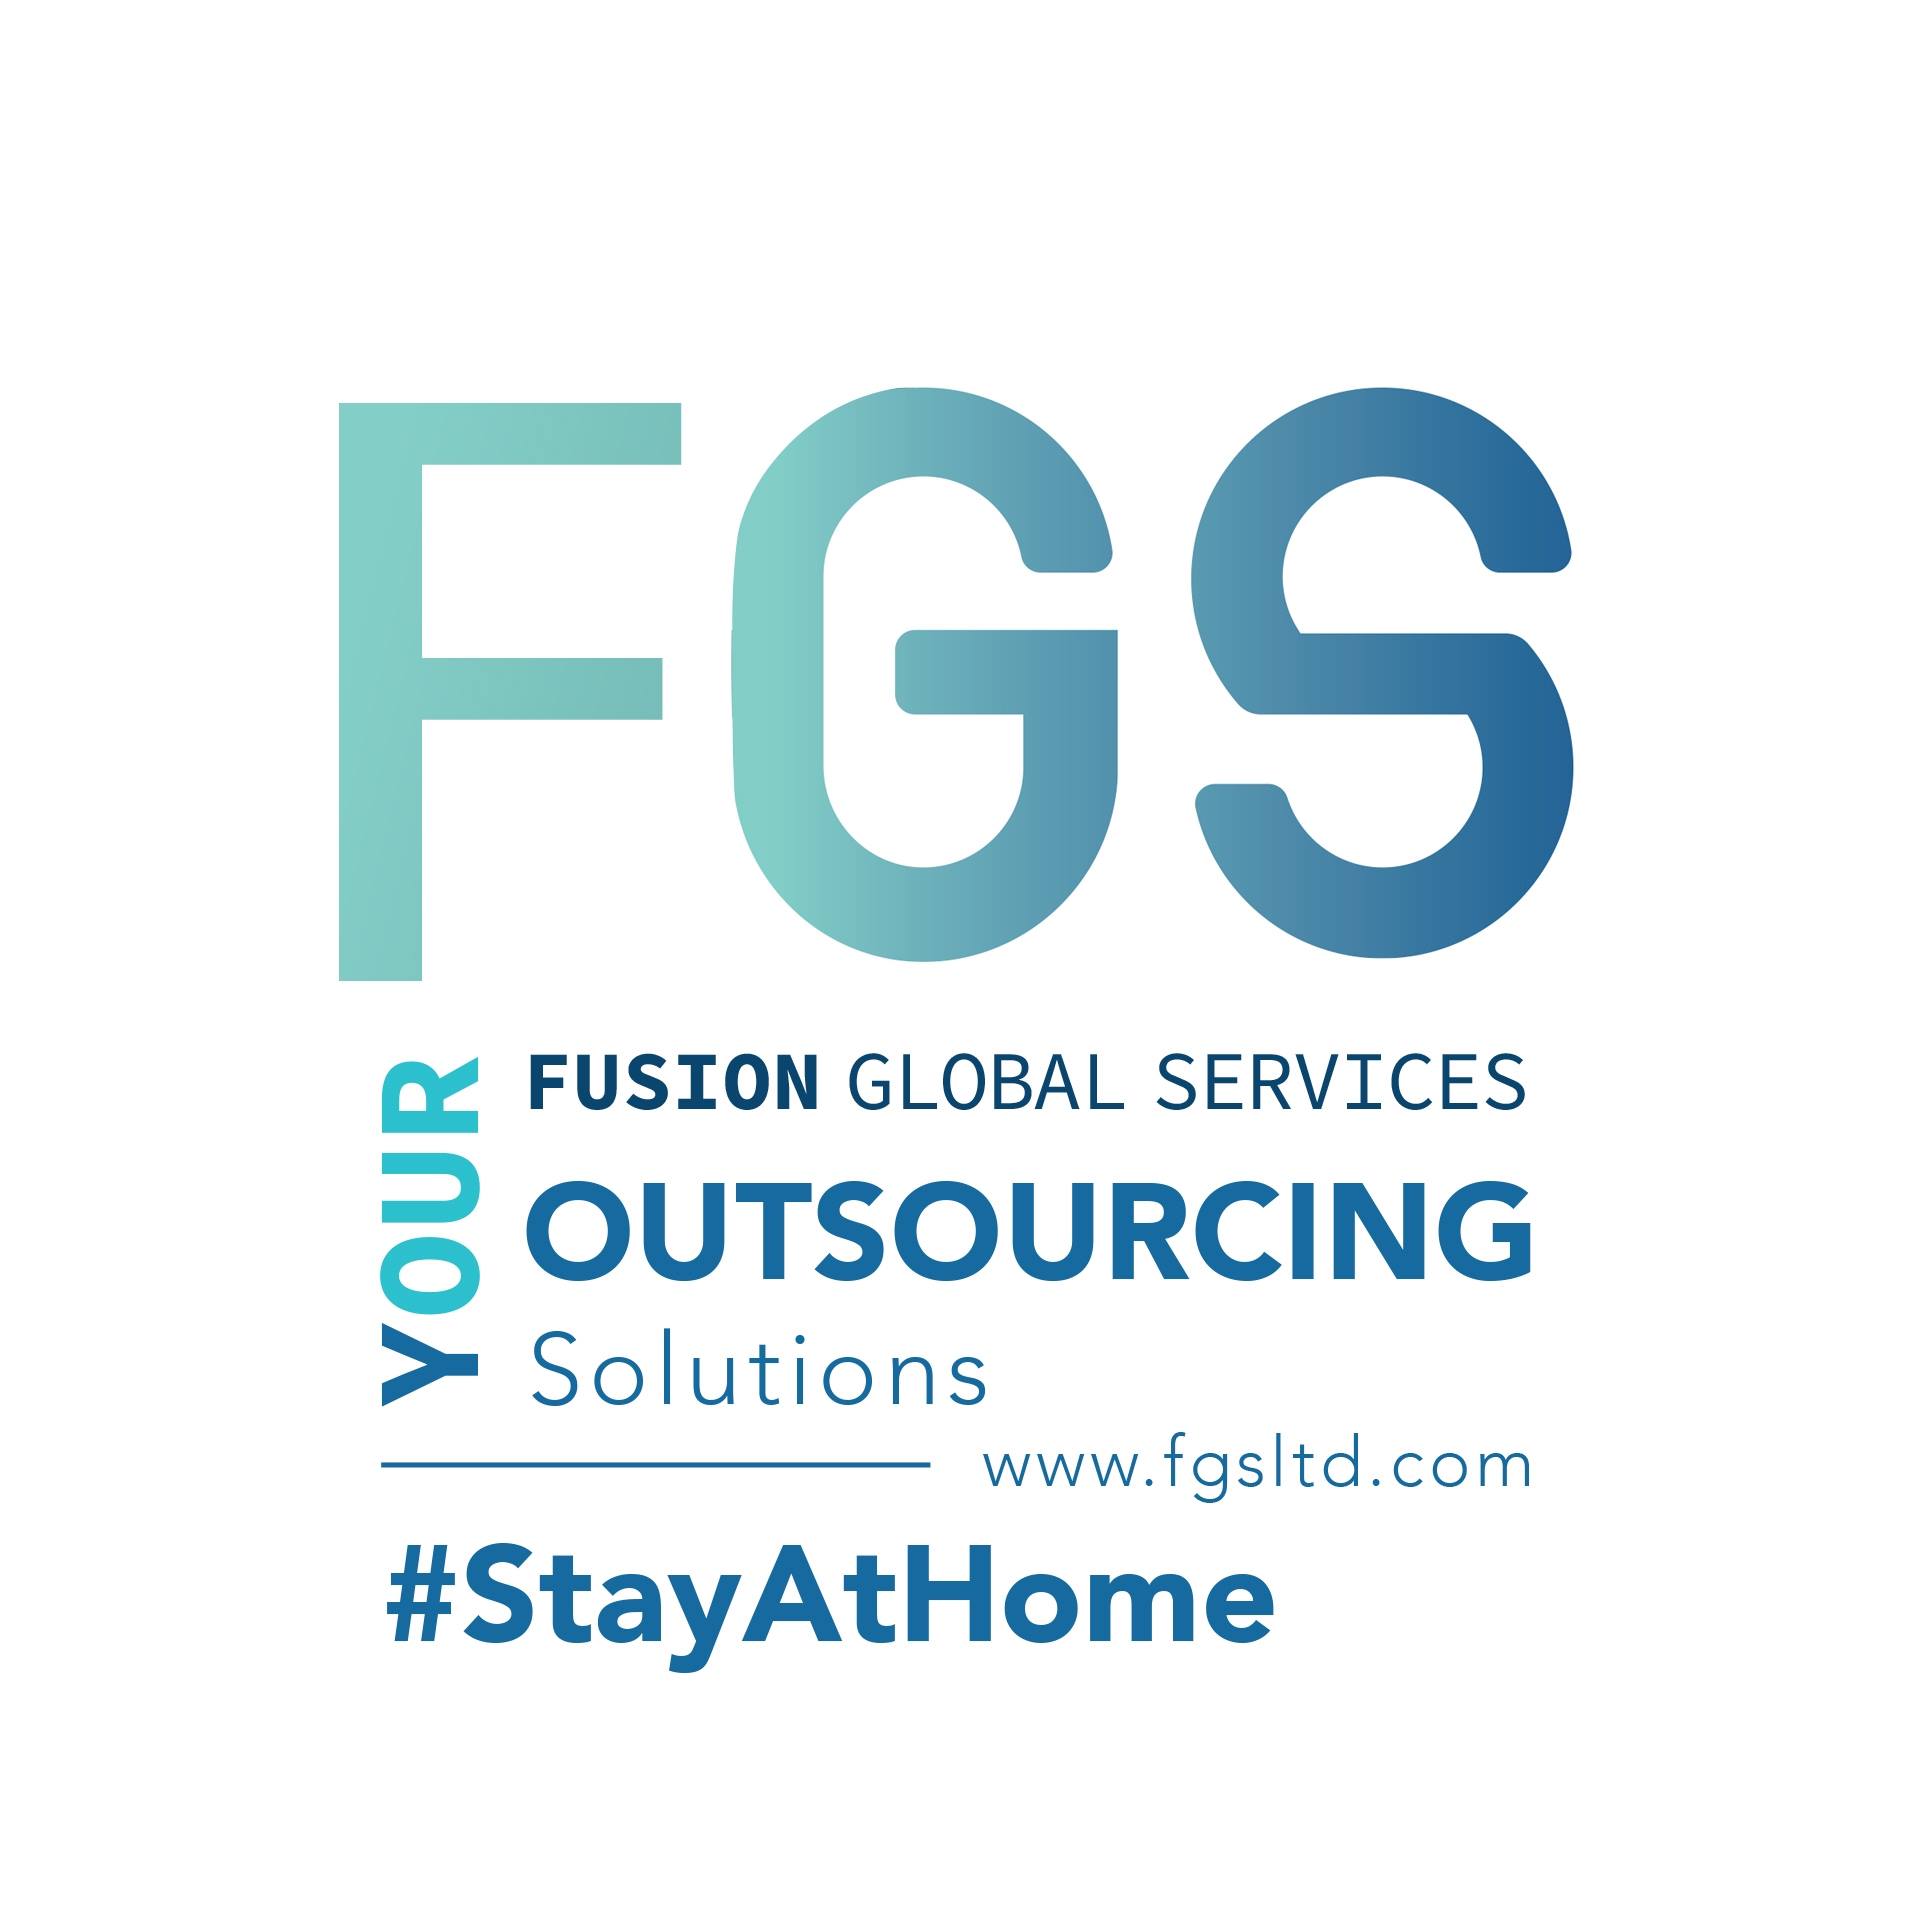 Fusion global service